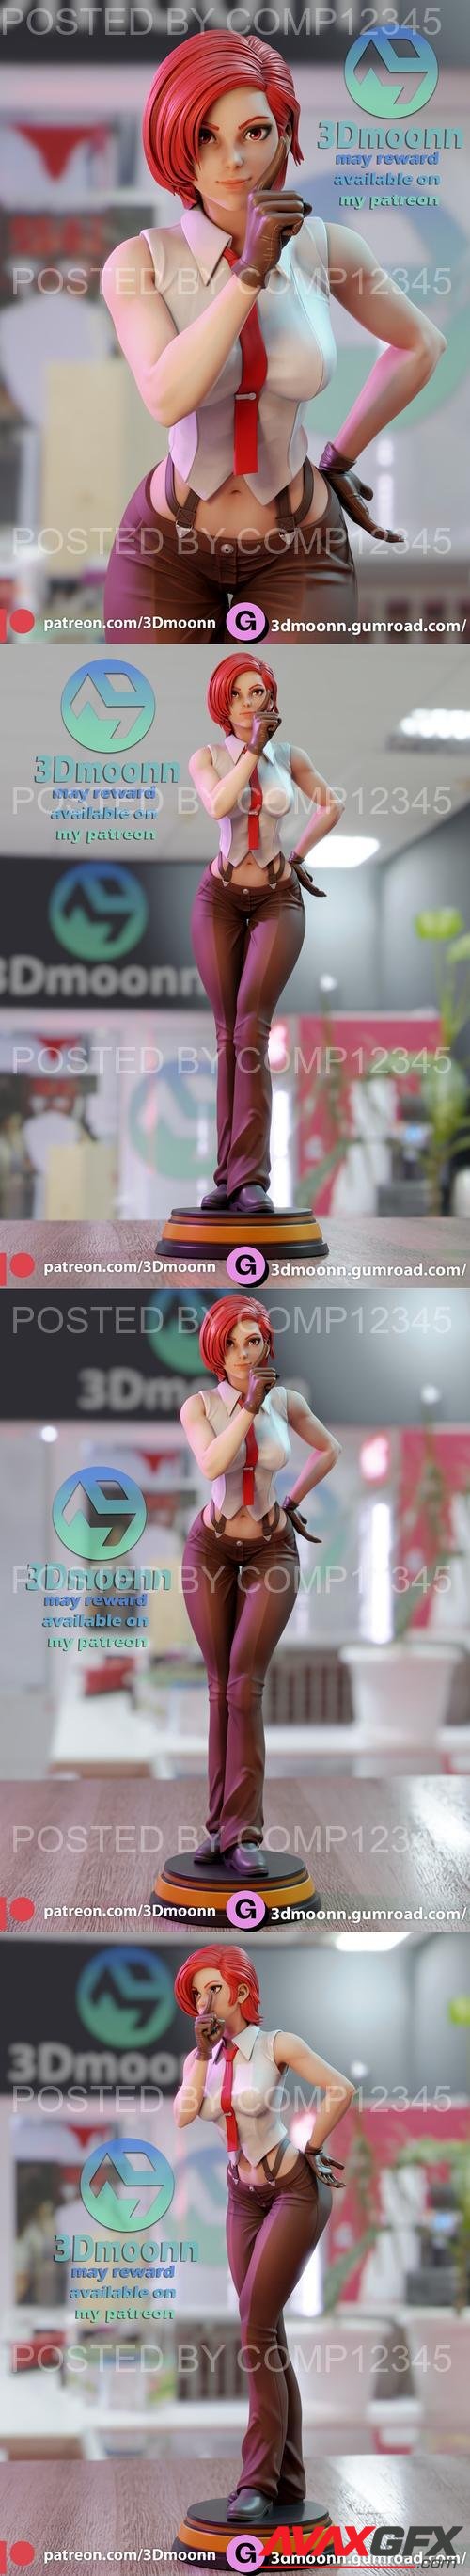 Vanessa - the king of fighters - 3Dmoonn 3D Print